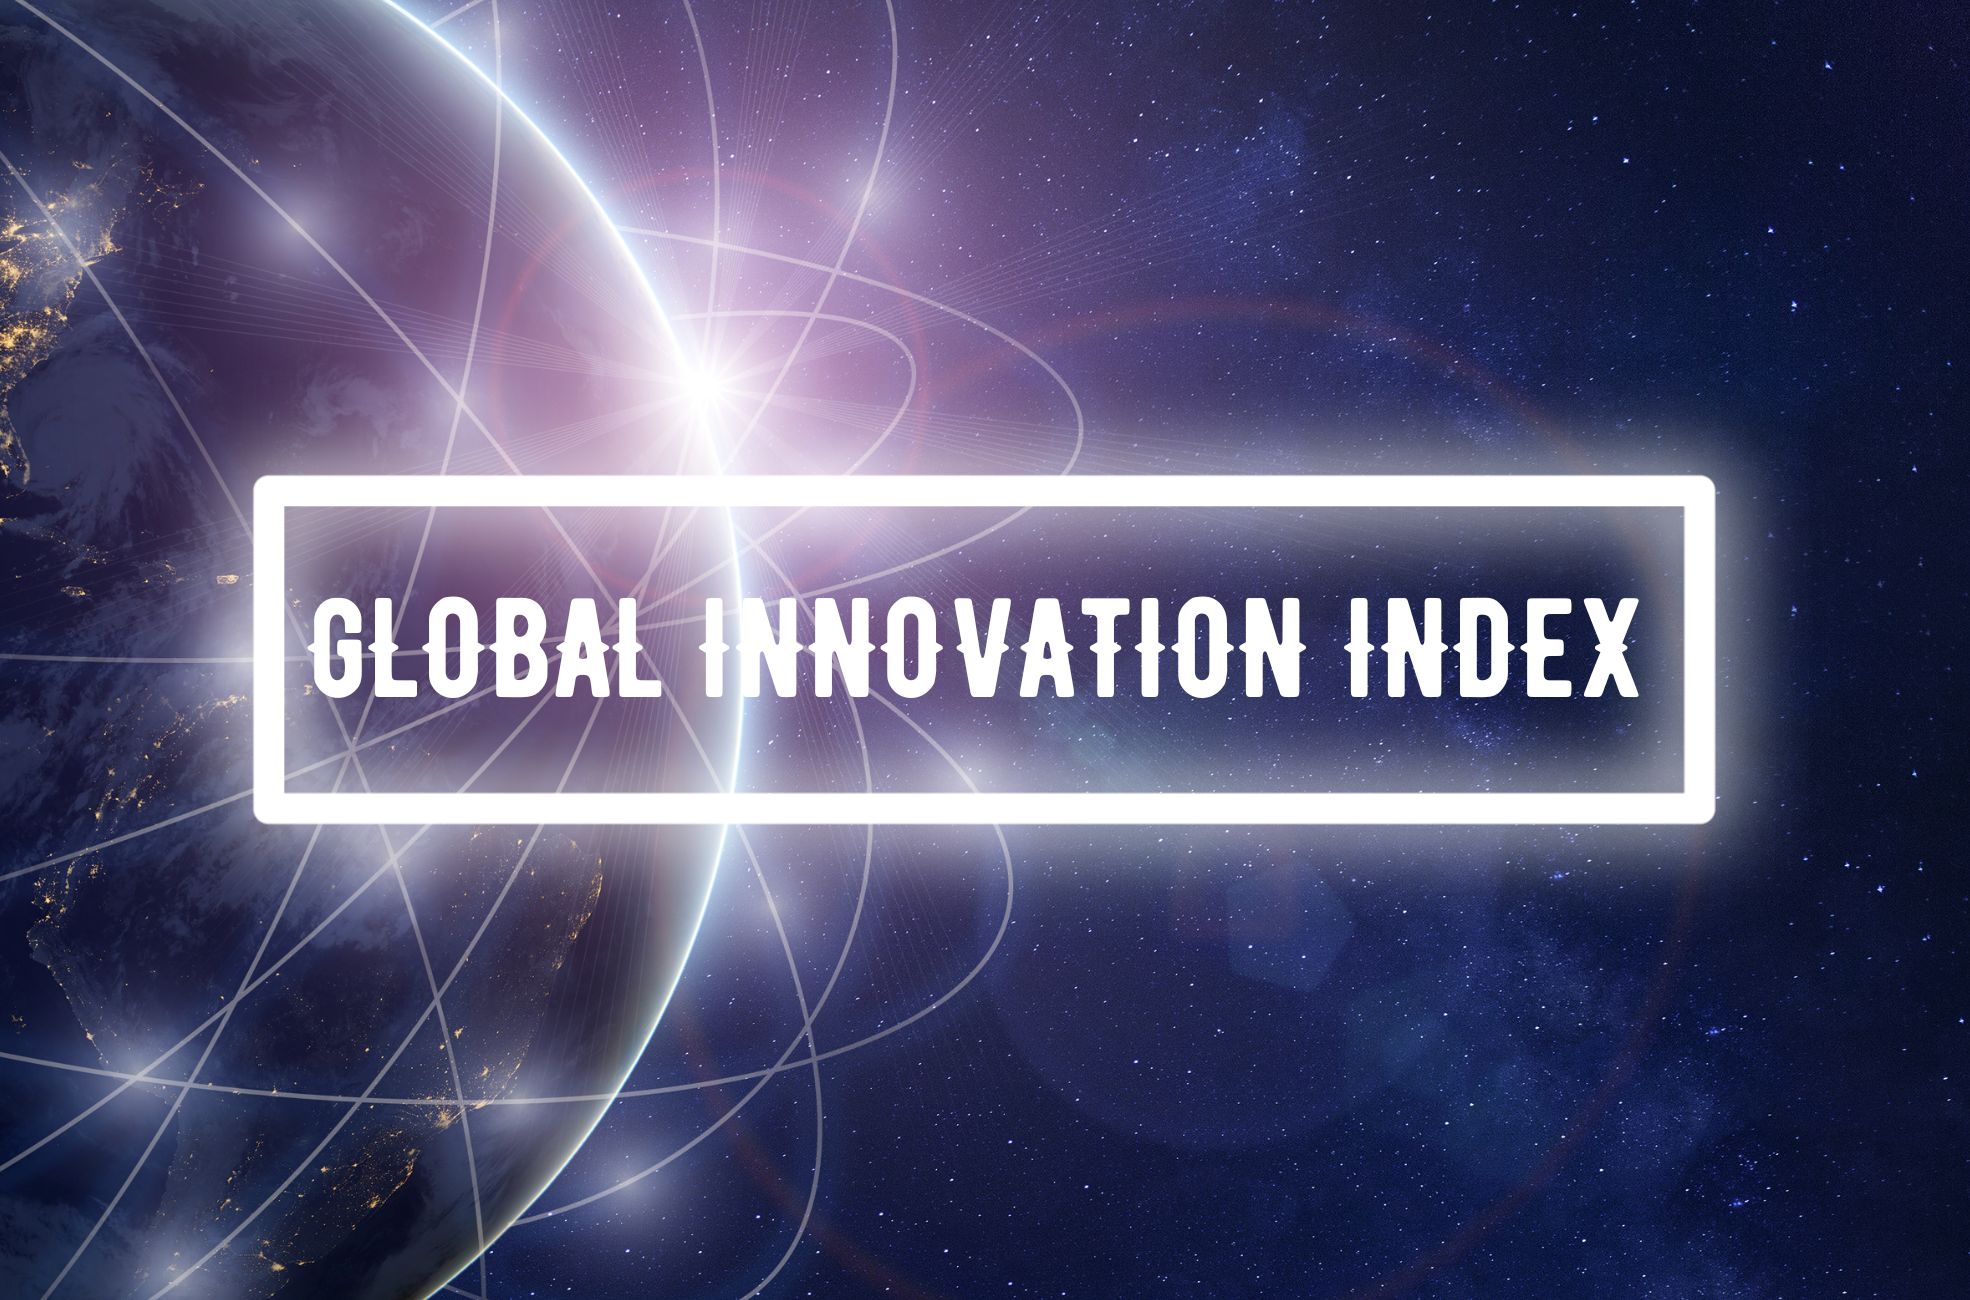 Stock Photo Showing Global Innovation Index